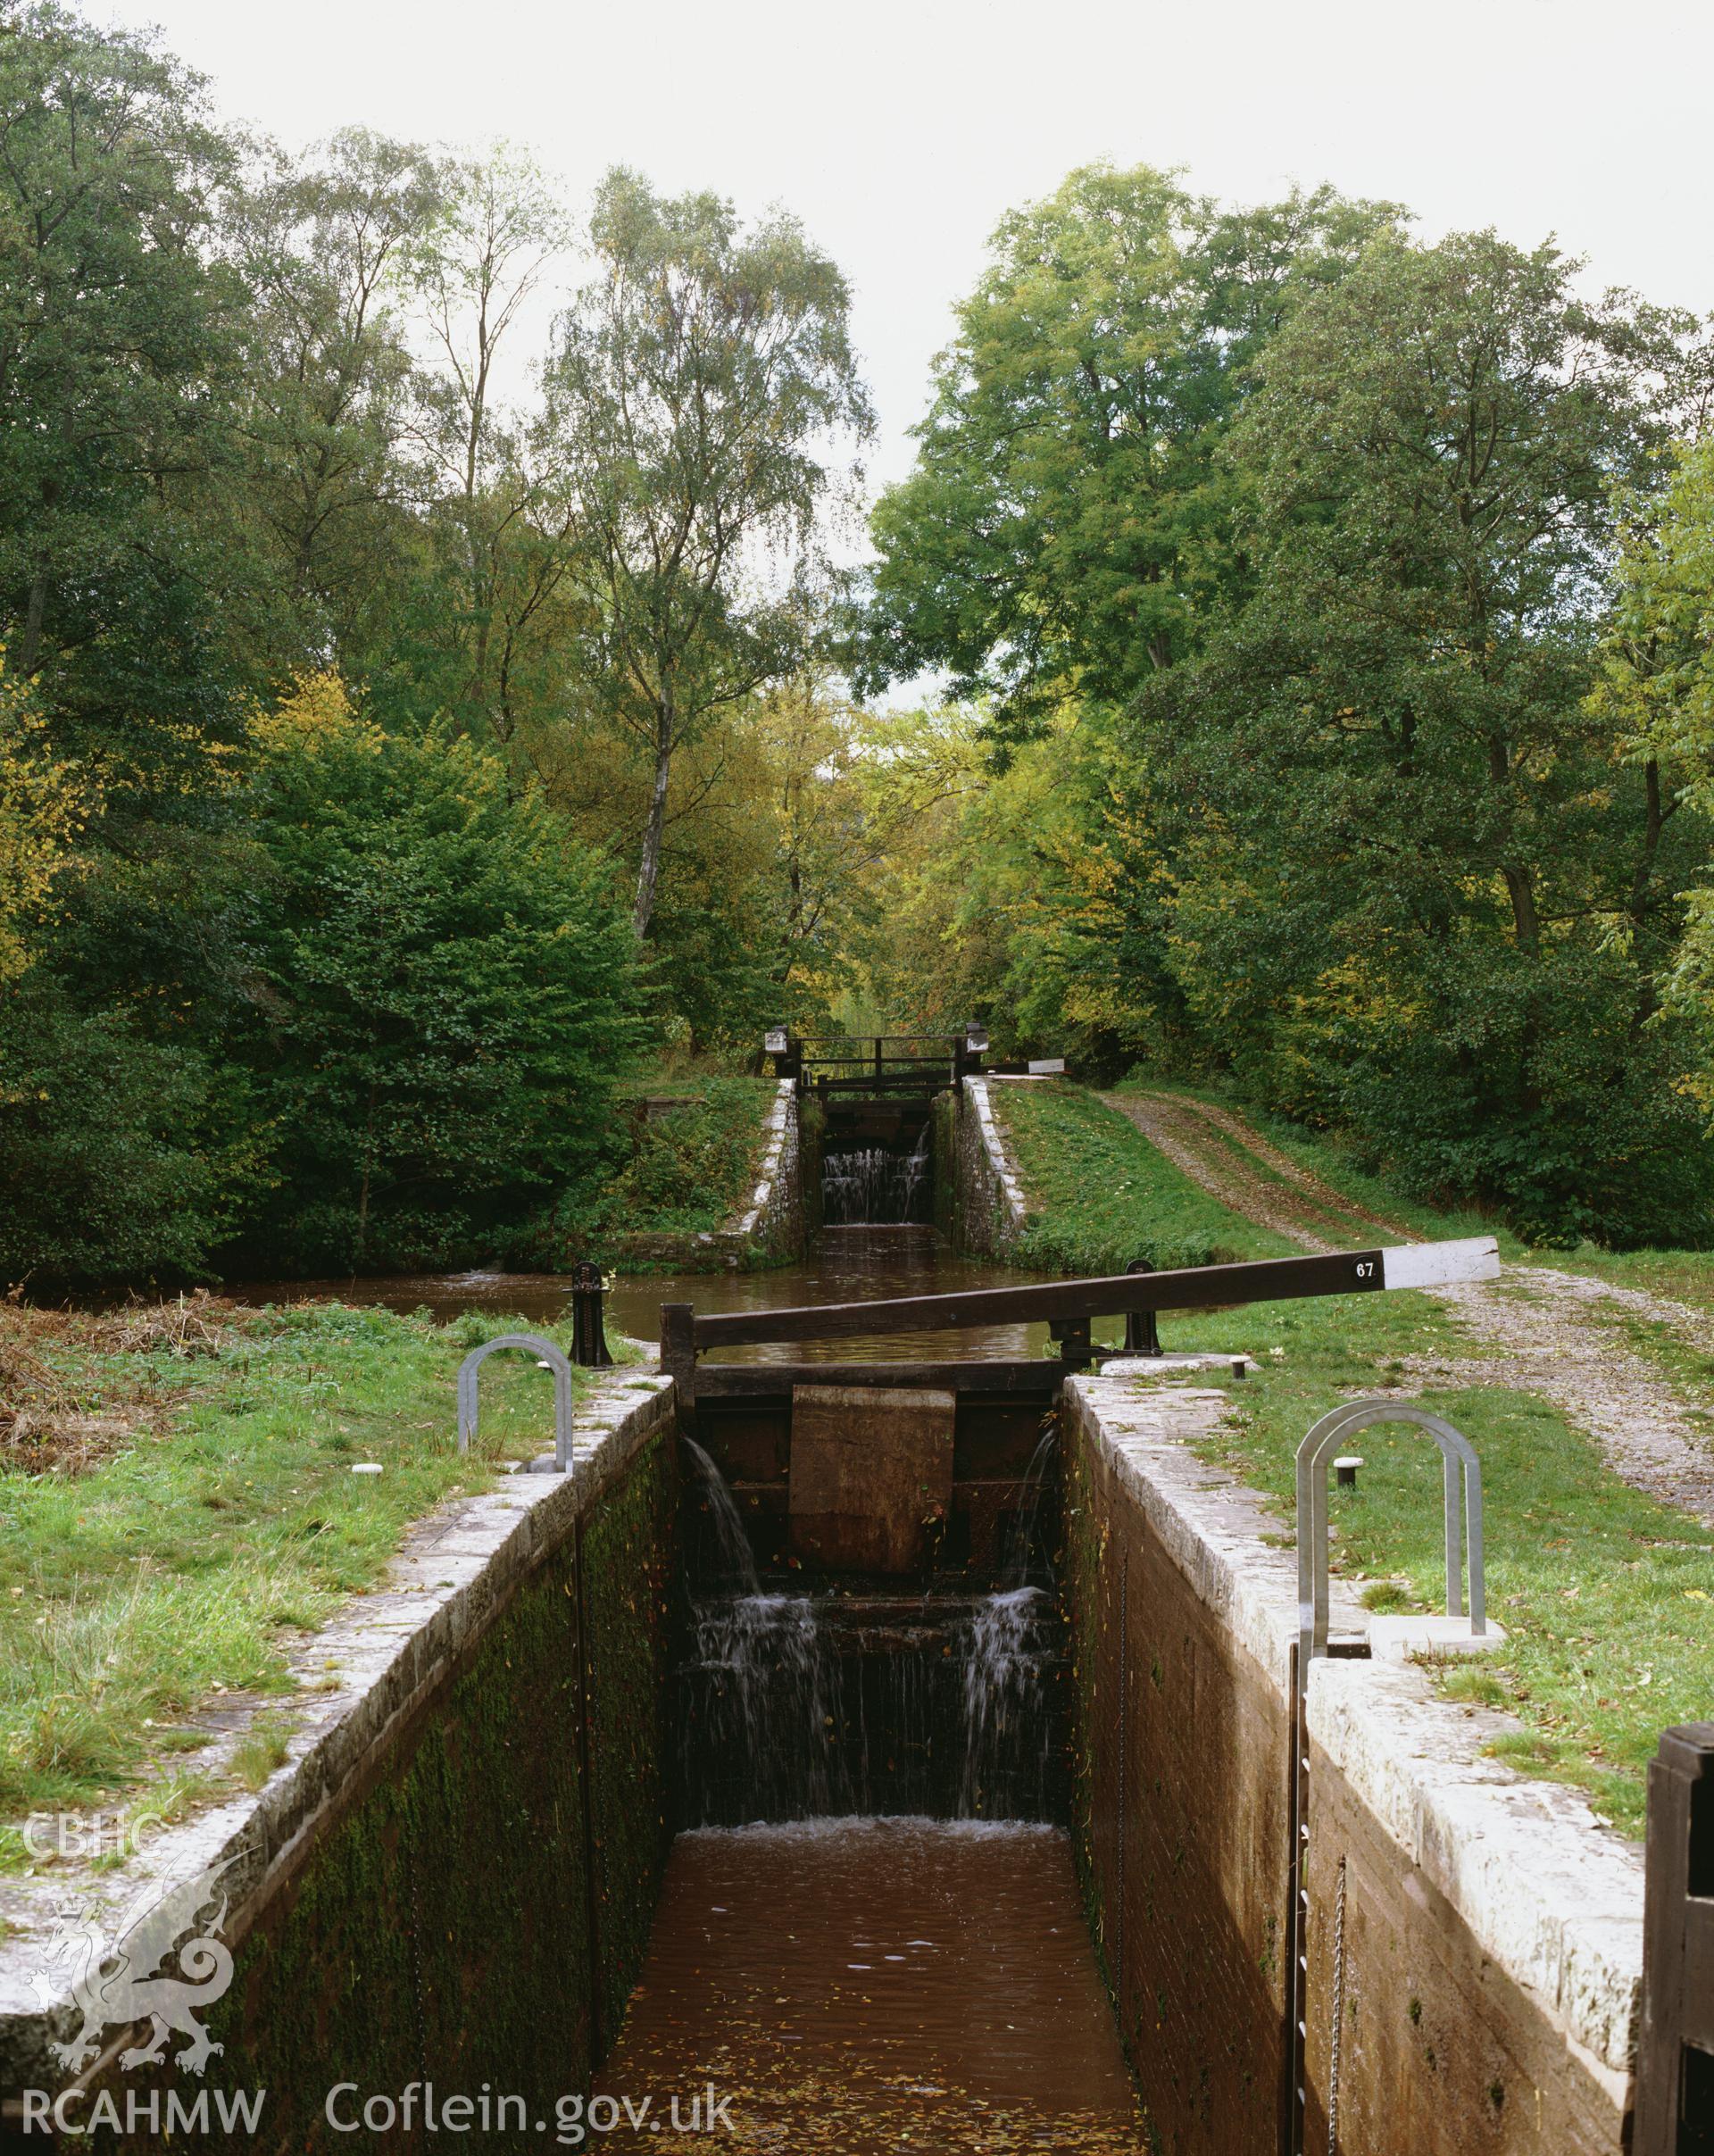 RCAHMW colour transparency showing Lock 67 at Llangynidr, taken by Iain Wright, c.1990